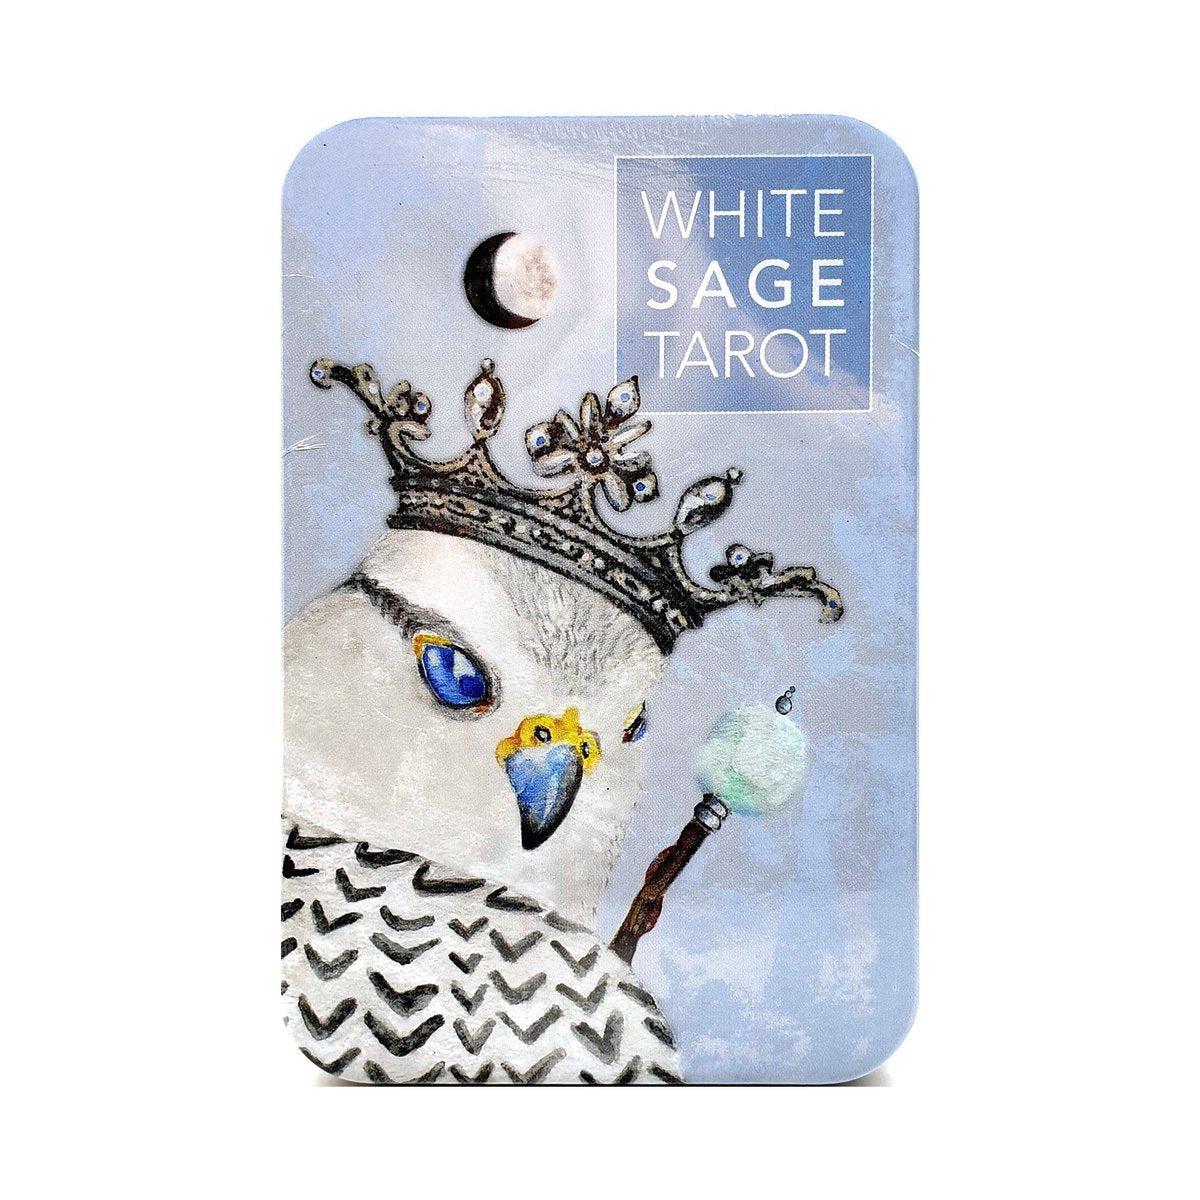 Tarot White Sage-U.S.Games-Ace Cards & Collectibles